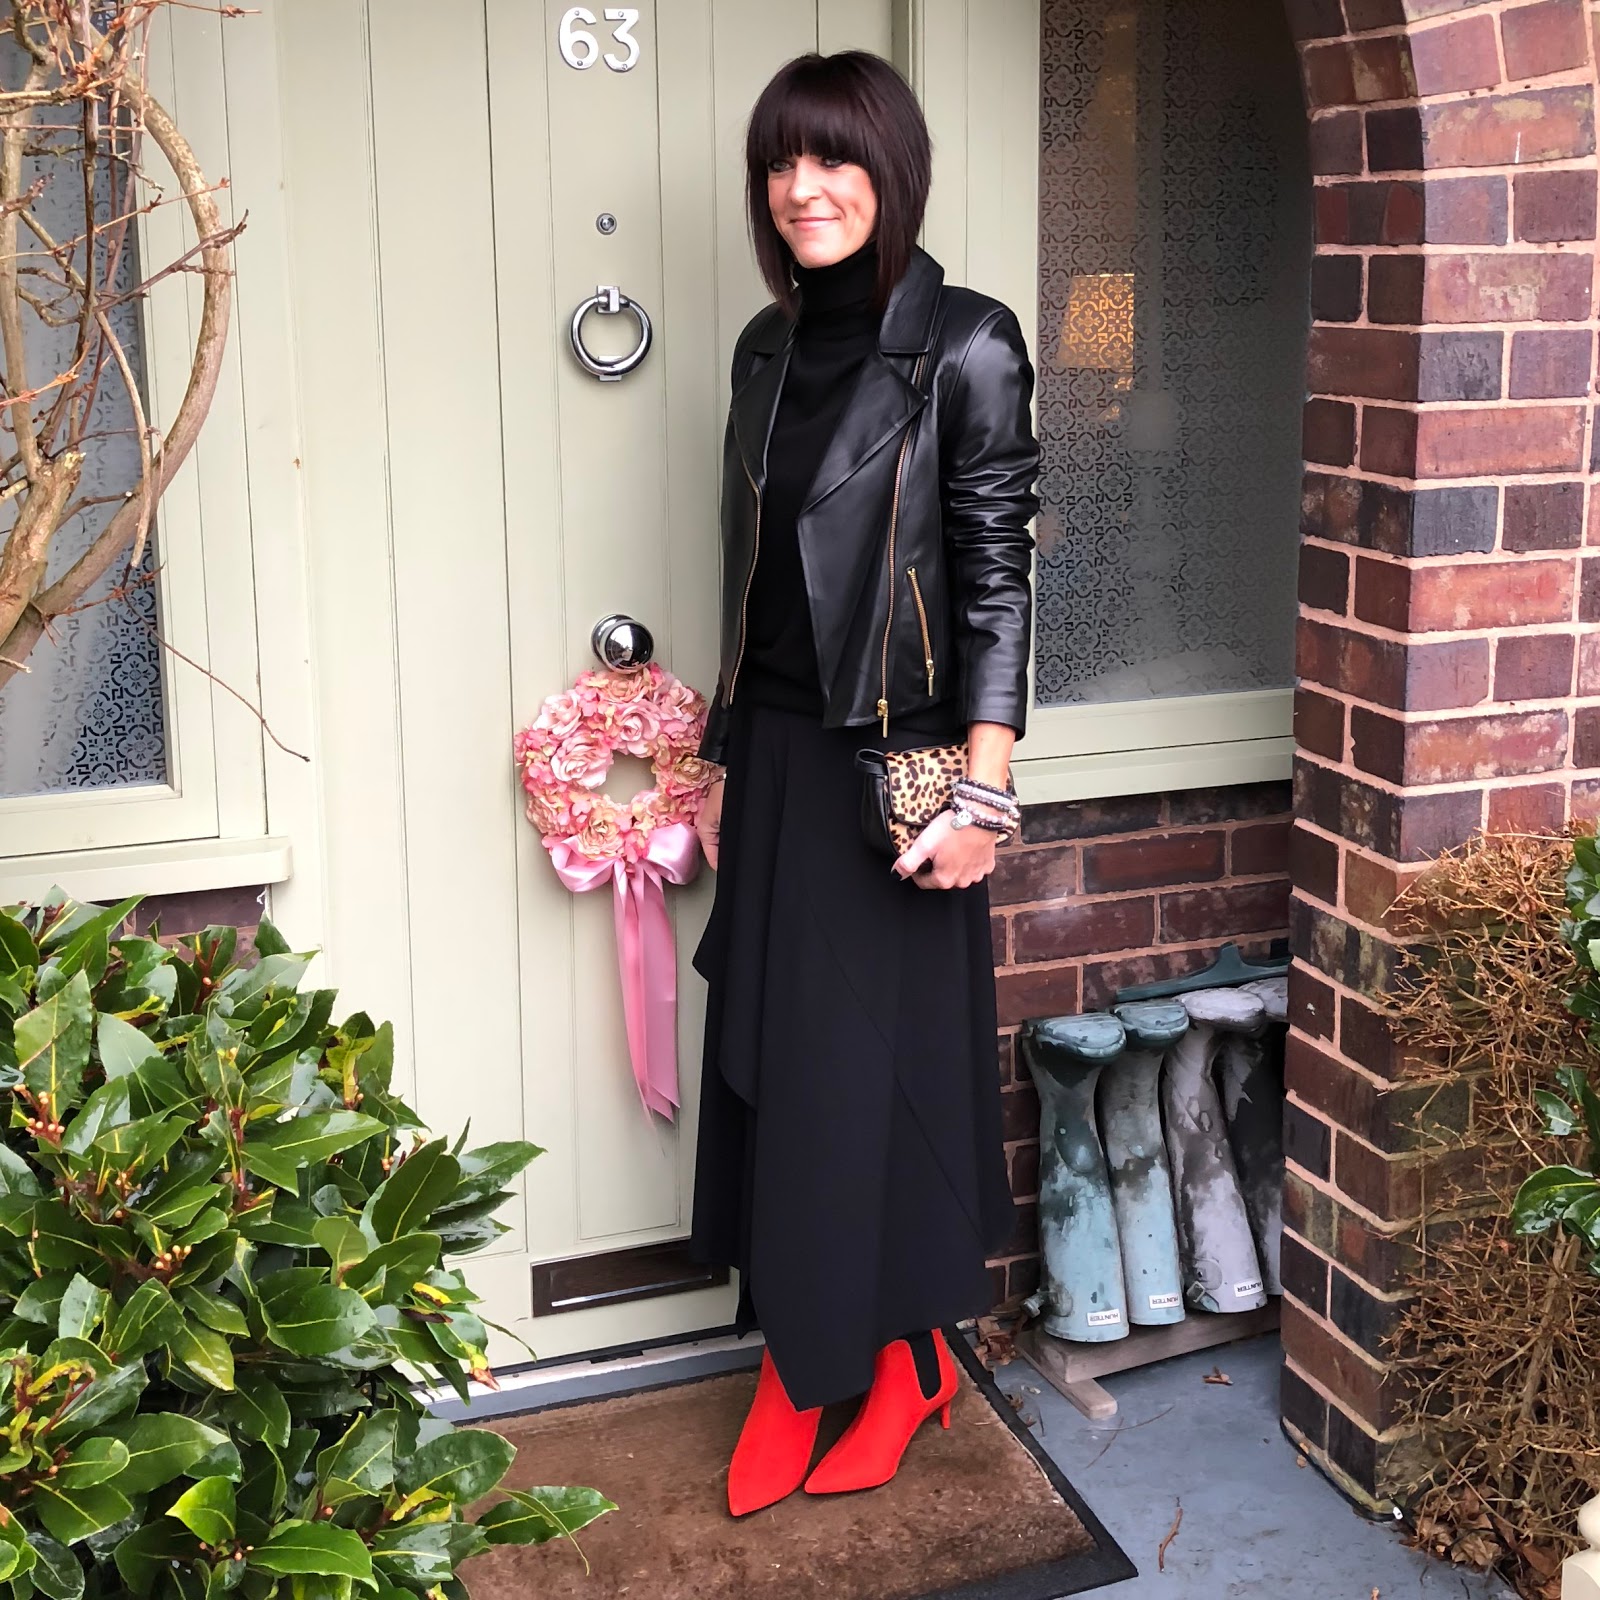 my midlife fashion, j crew leopard print bag, marks and spencer kitten heel pointed toe ankle boots, marks and spencer asymmetric panel detail midi skirt, marks and spencer pure cashmere roll neck sweater, baukjen leather everyday biker jacket